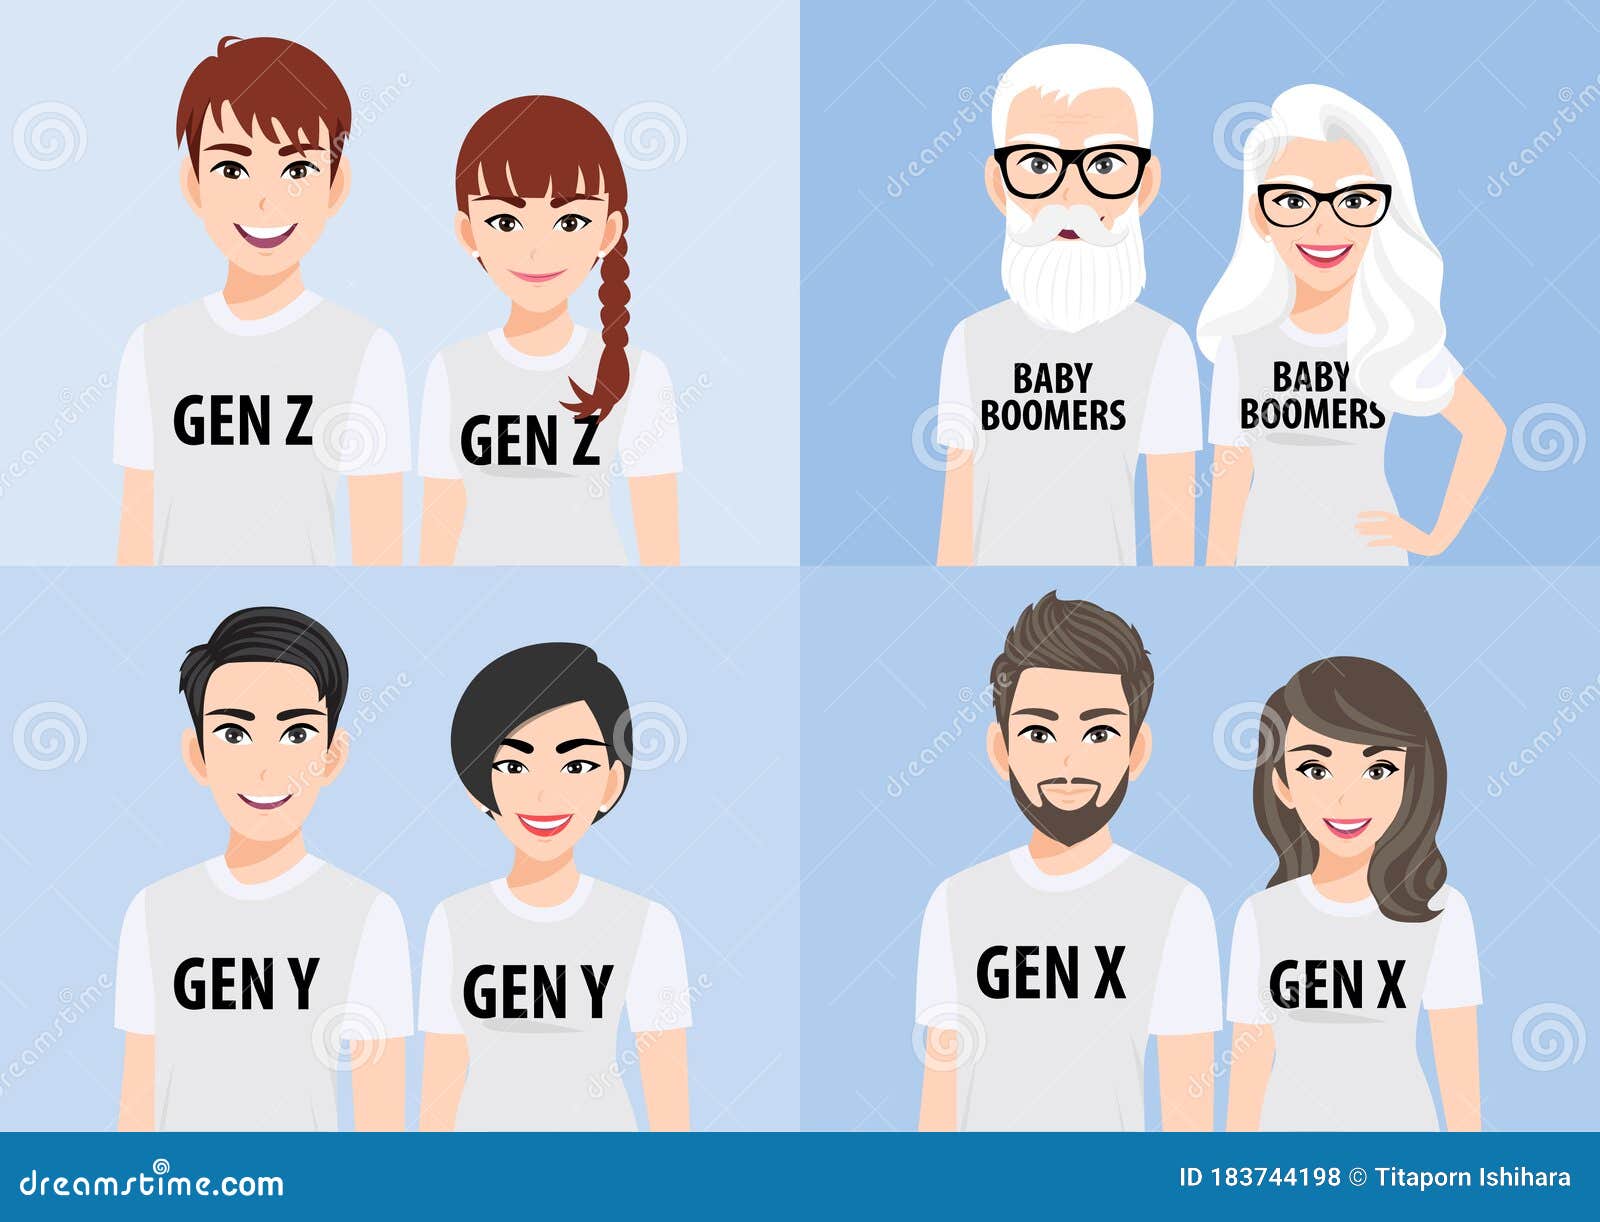 cartoon character with generations concept. baby boomers, generation x, generation y or millennial 